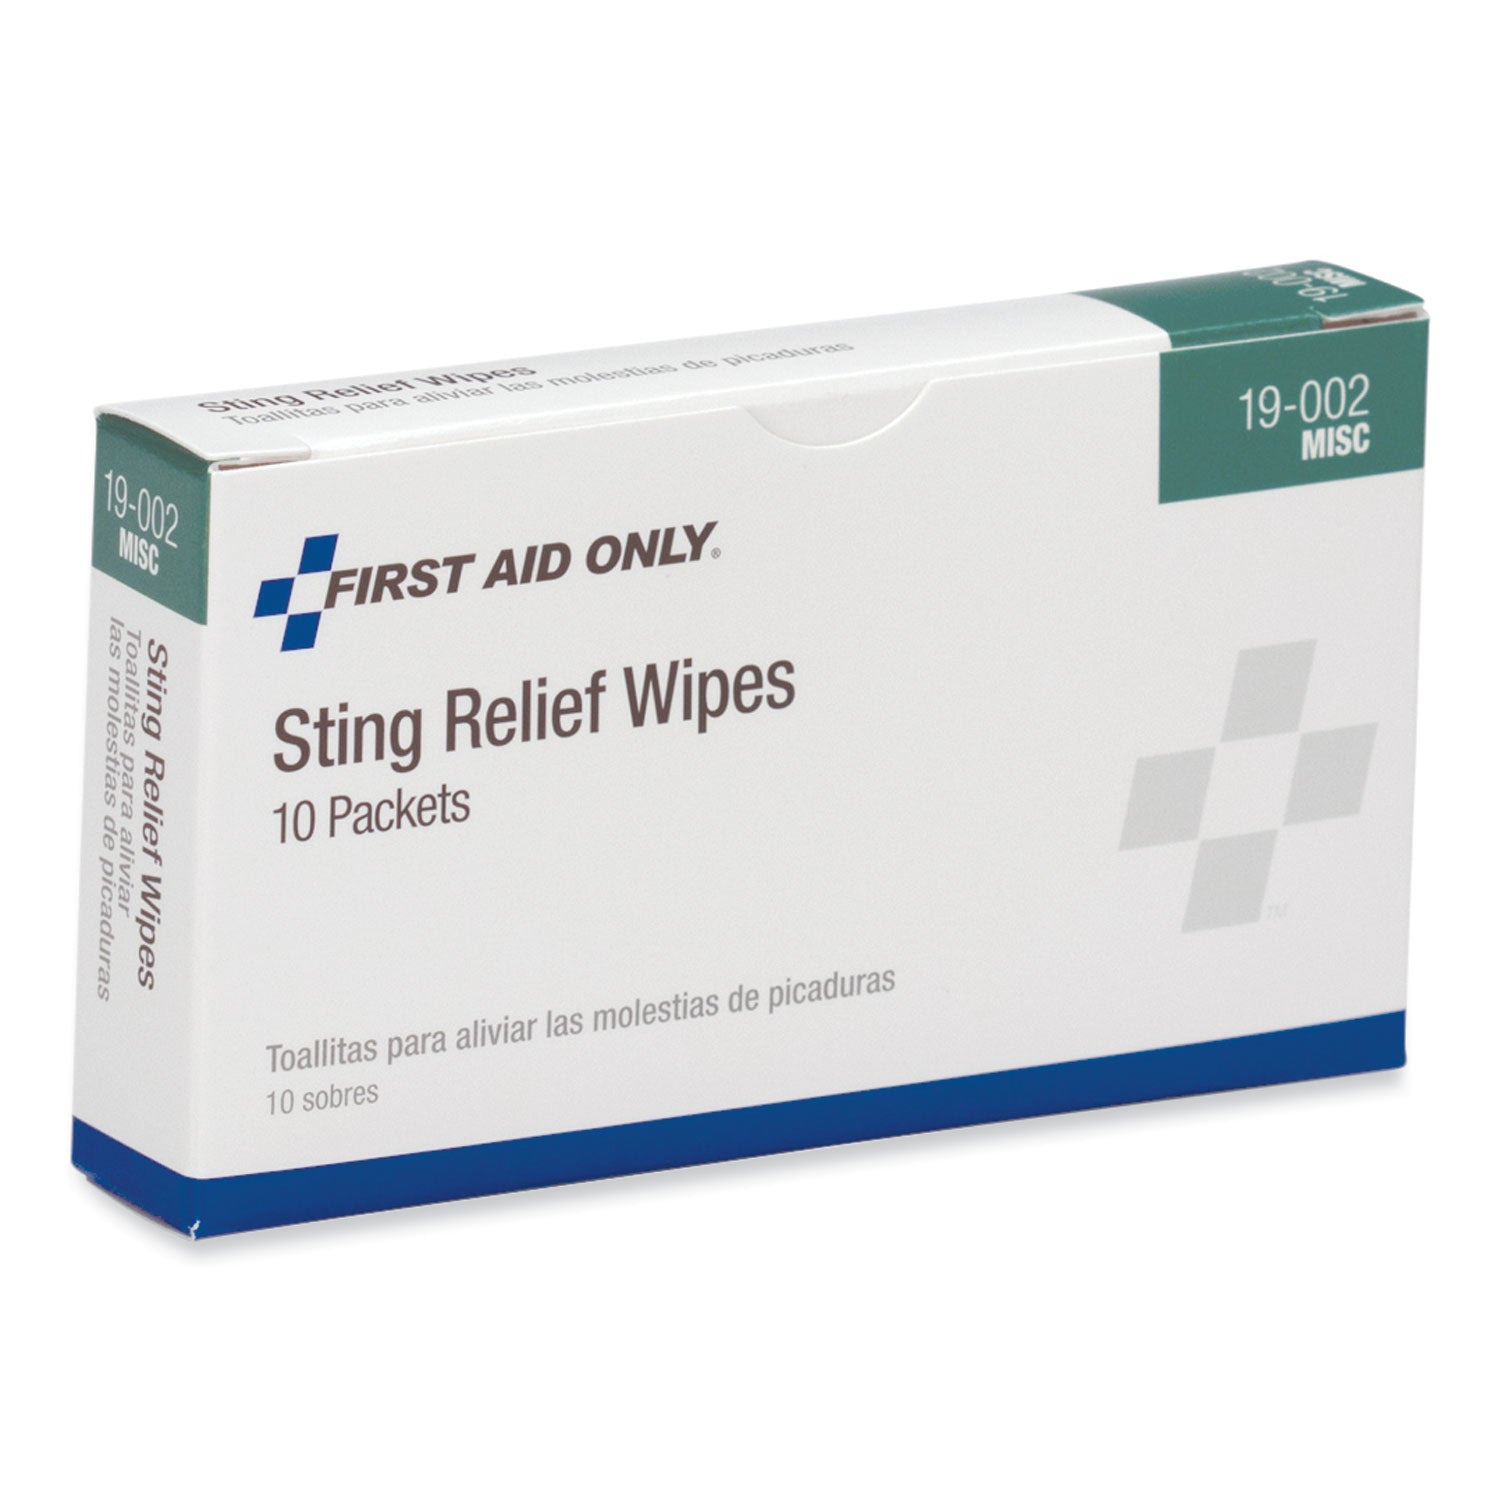 first-aid-sting-relief-pads-10-box_fao19002 - 2